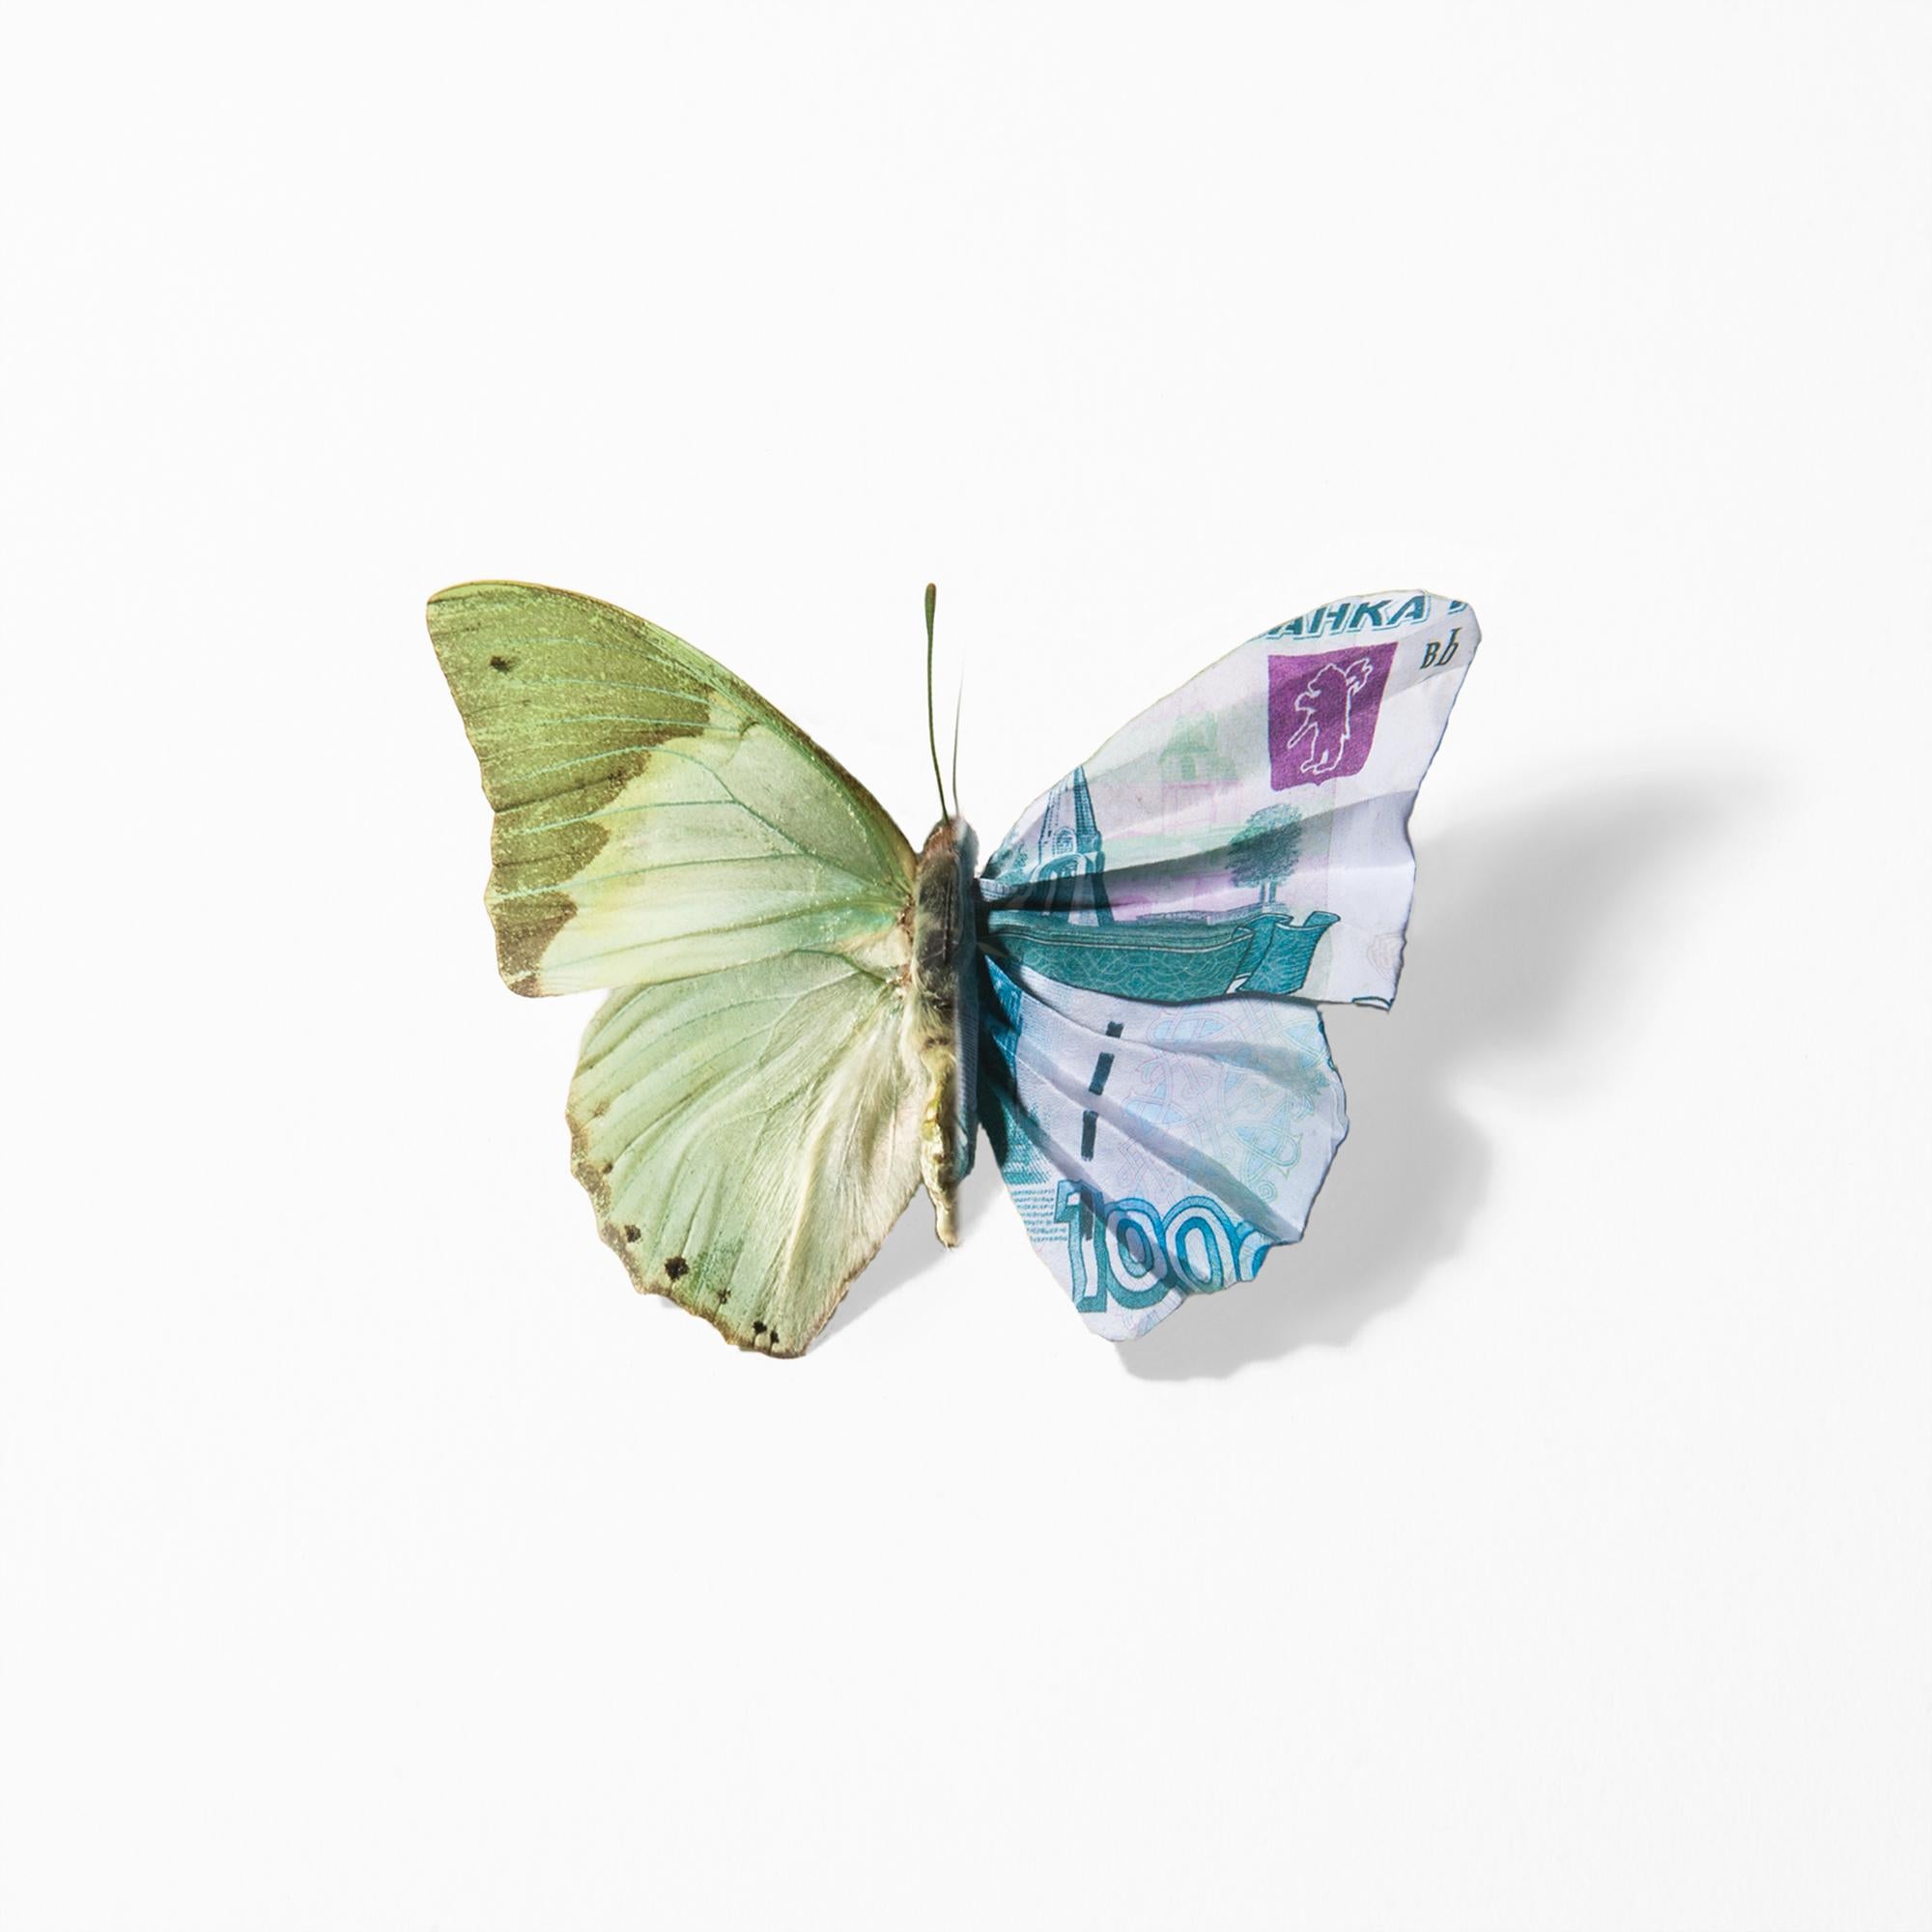 Anna Tas Still-Life Photograph – „A Thing of Beauty #7 (Charaxes) 20x20“, Lentikular, Schmetterling, Currency-Motiv